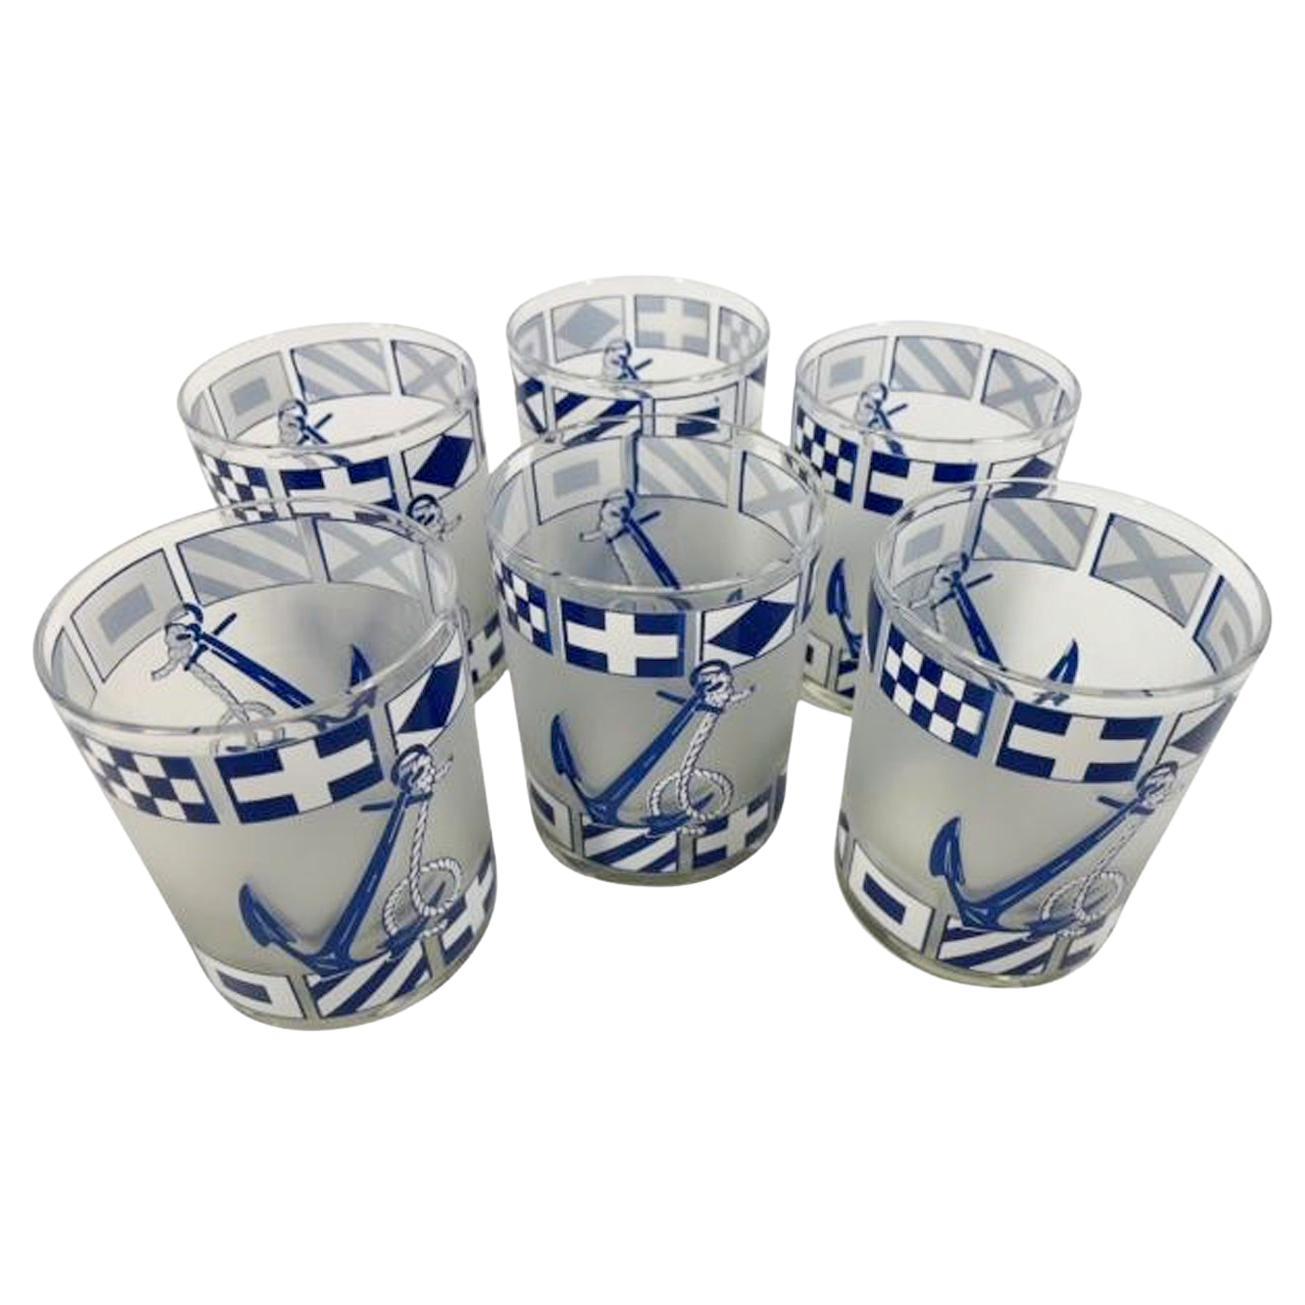 Vintage Culver Frosted Rocks Glasses with Anchors Between Bands of Flags 